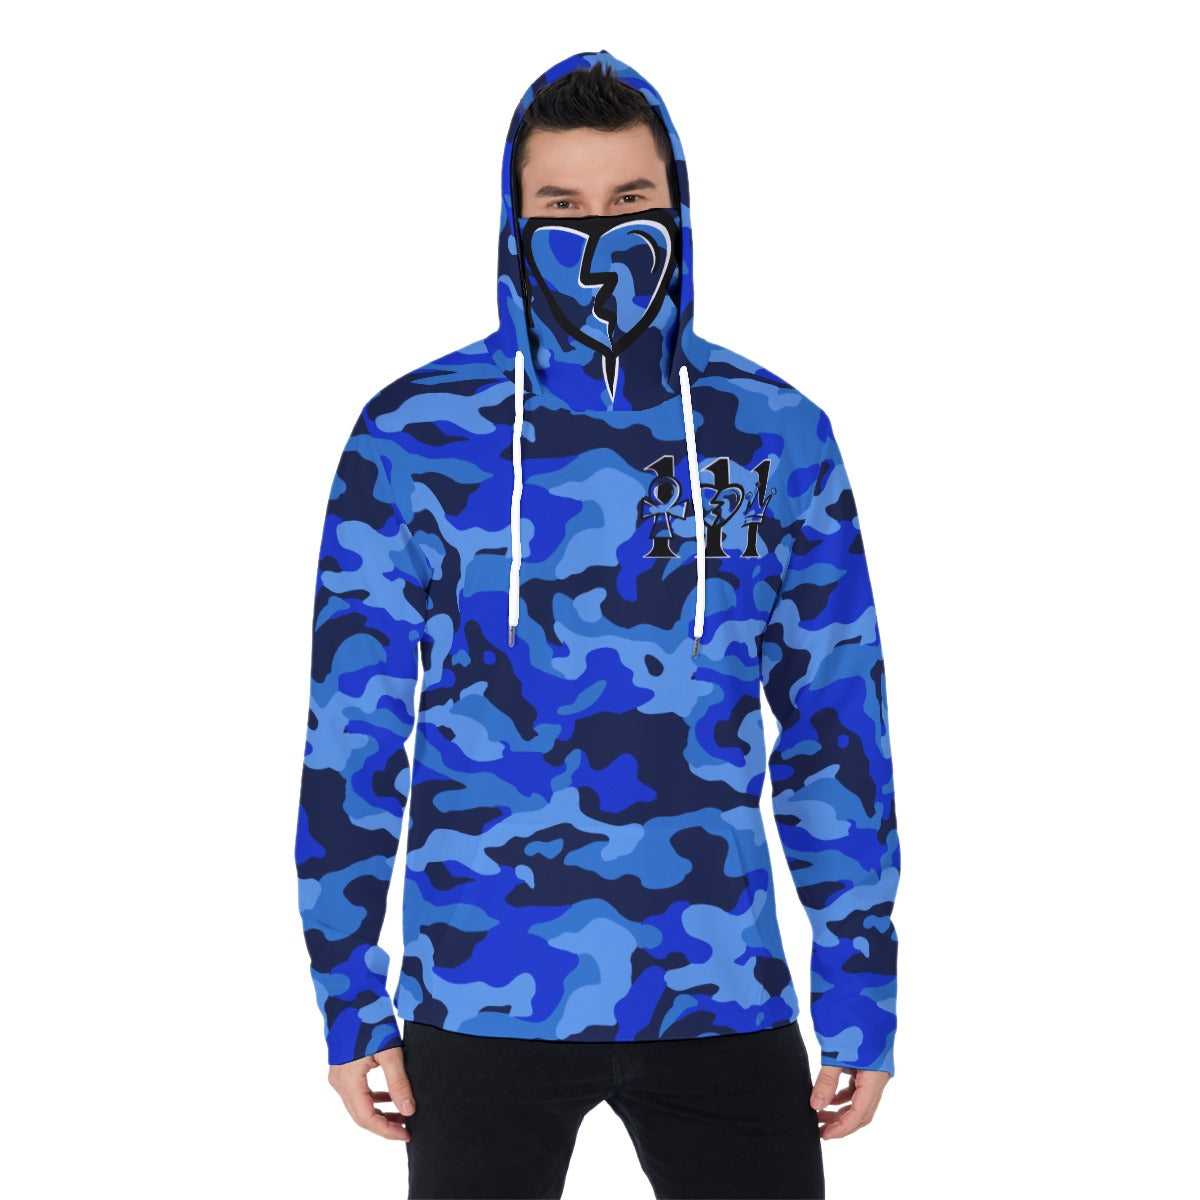 111 BLUE 22 CAMO Hoodie With Mask – Place Your Print On The World